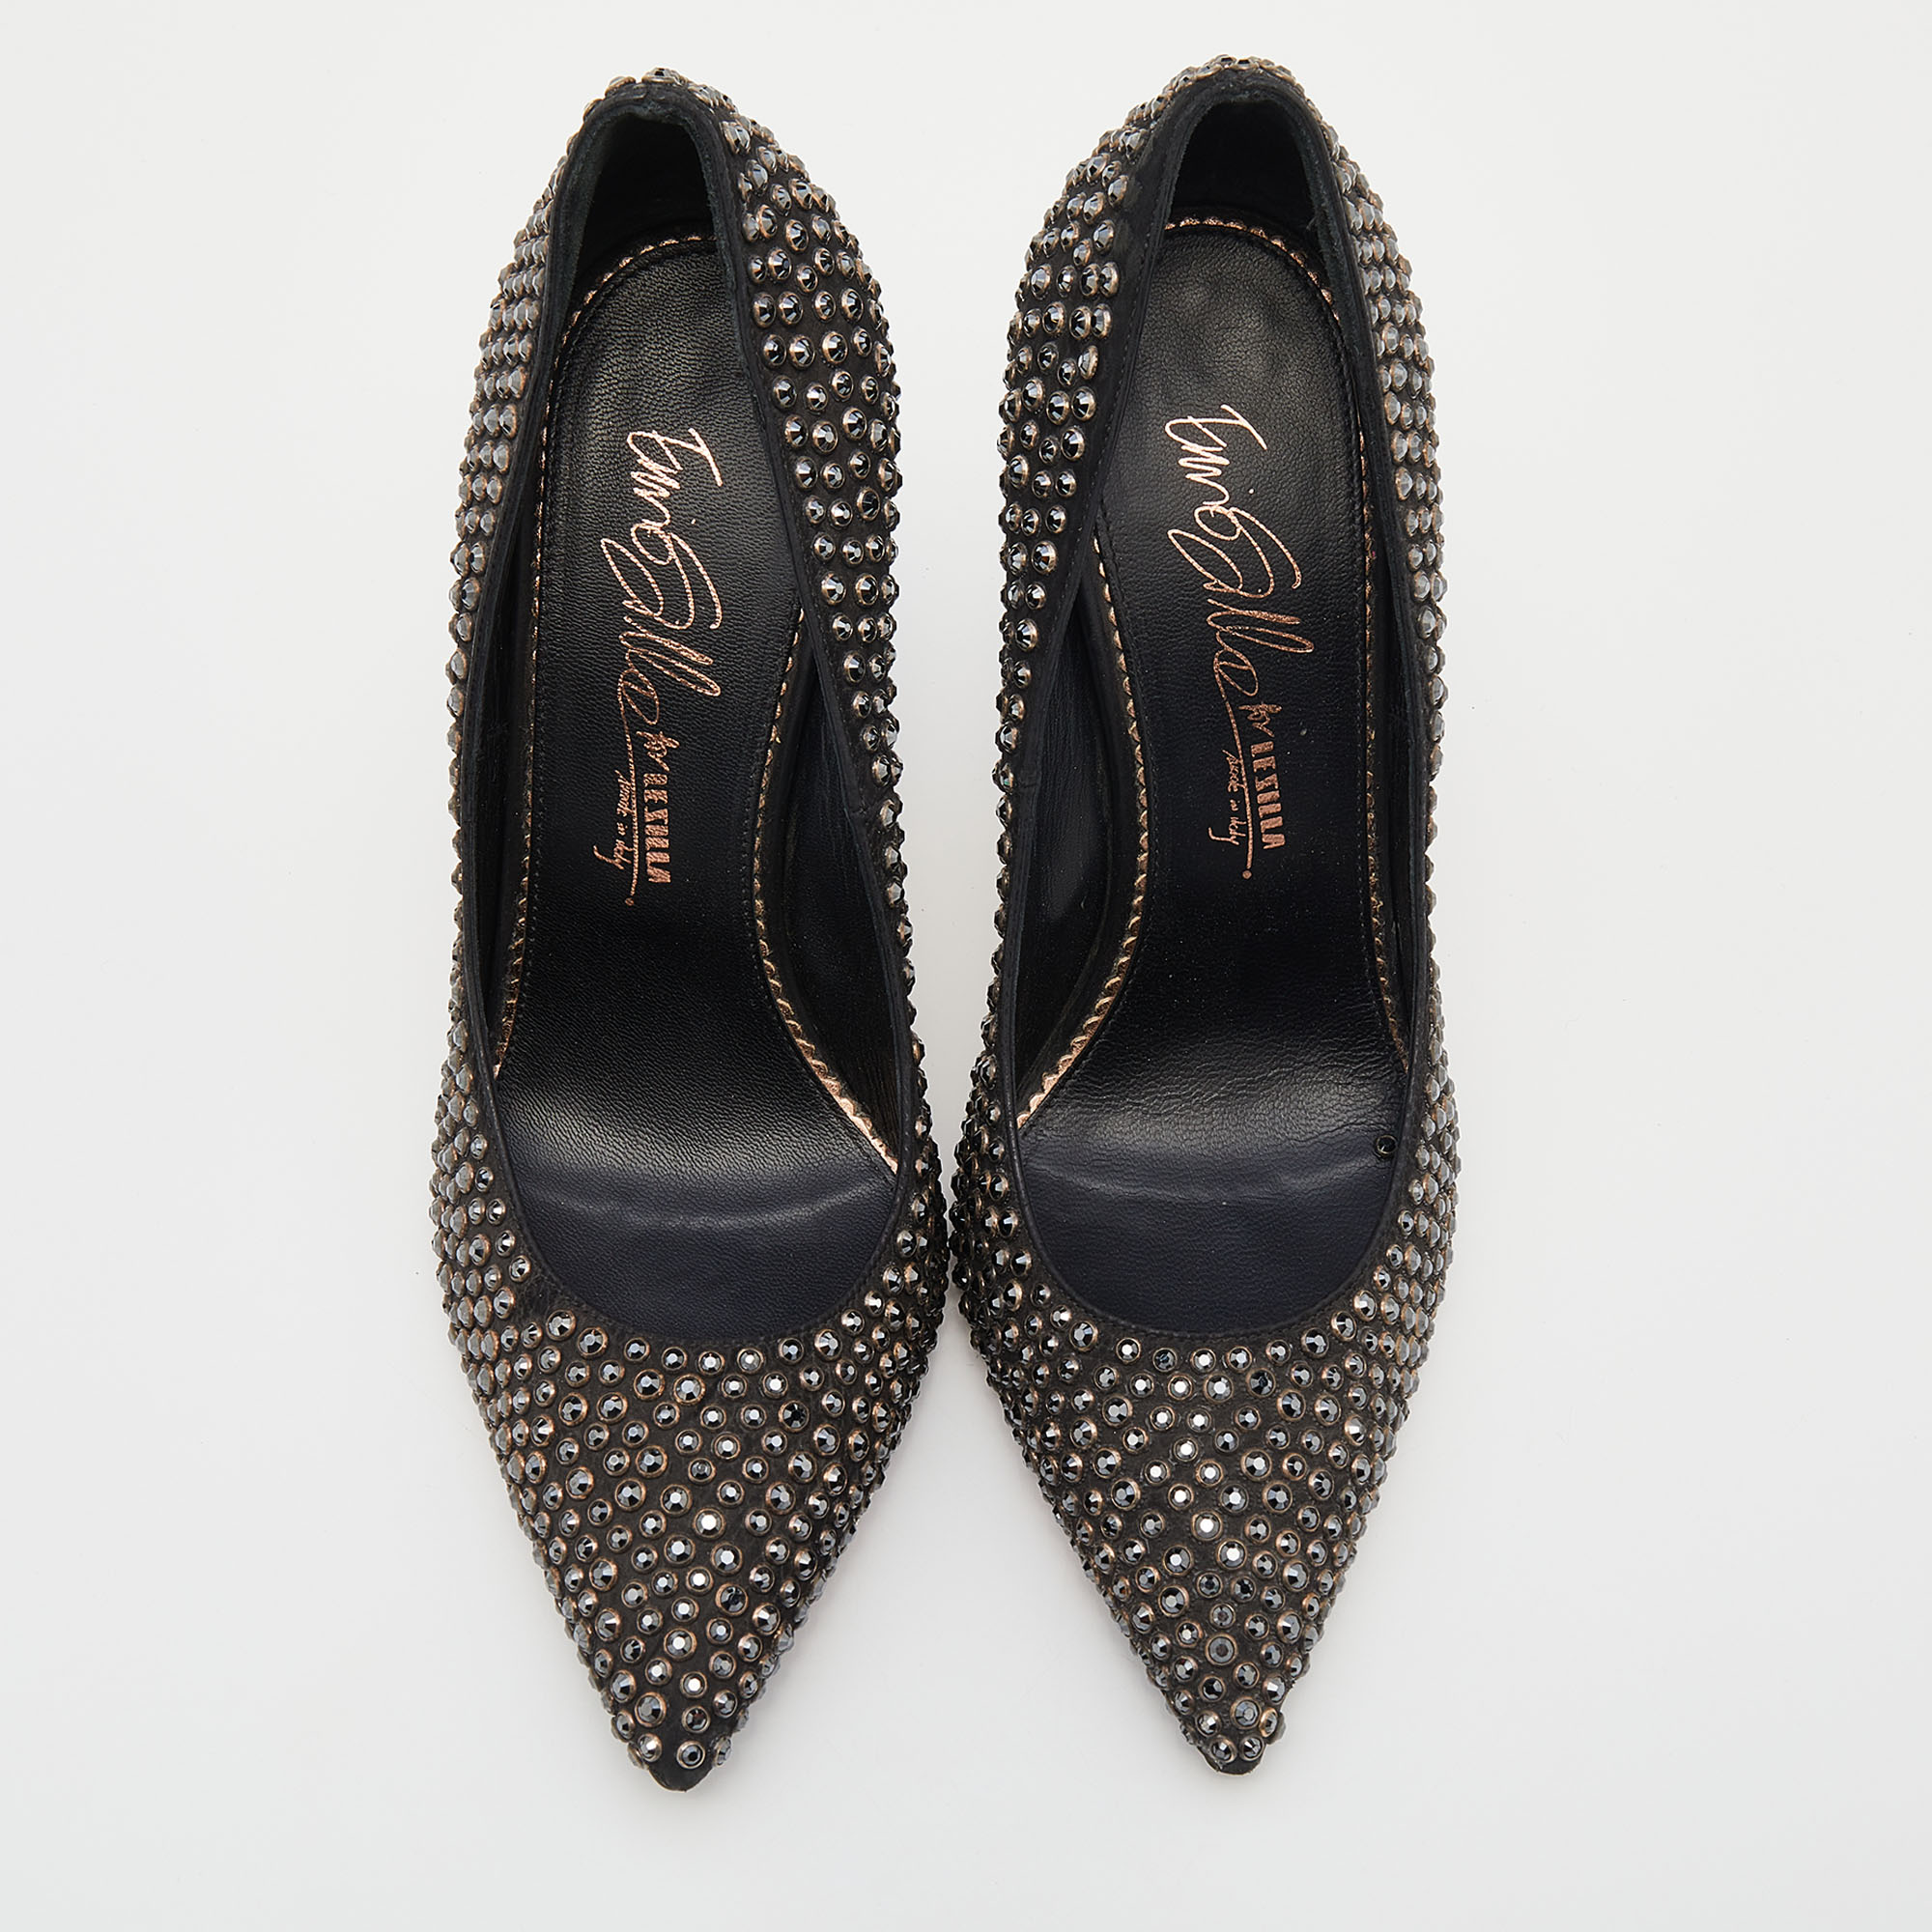 Le Silla Black Leather Crystal Embellished Pointed Toe Pumps Size 38